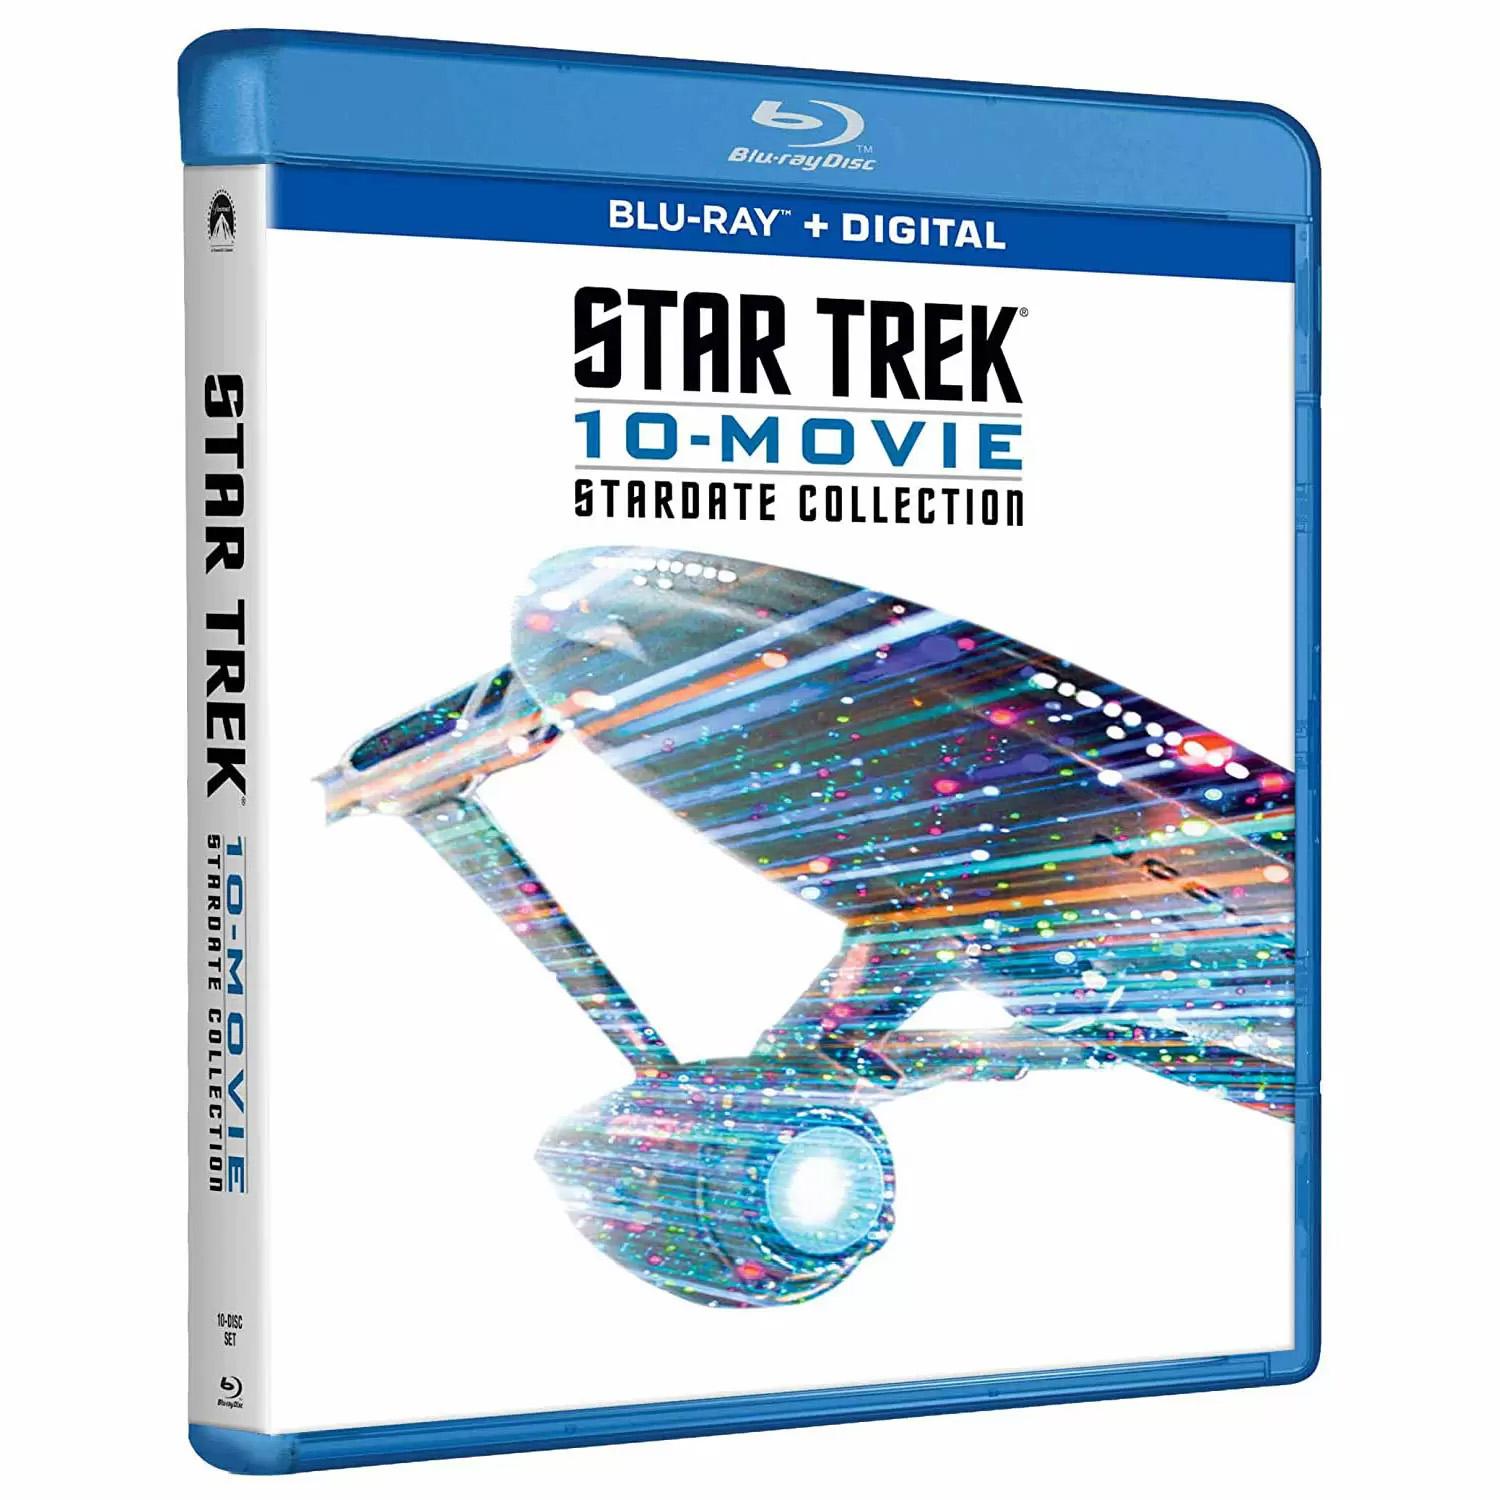 Star Trek 10-Movie Stardate Collection Blu-ray for $29.35 Shipped